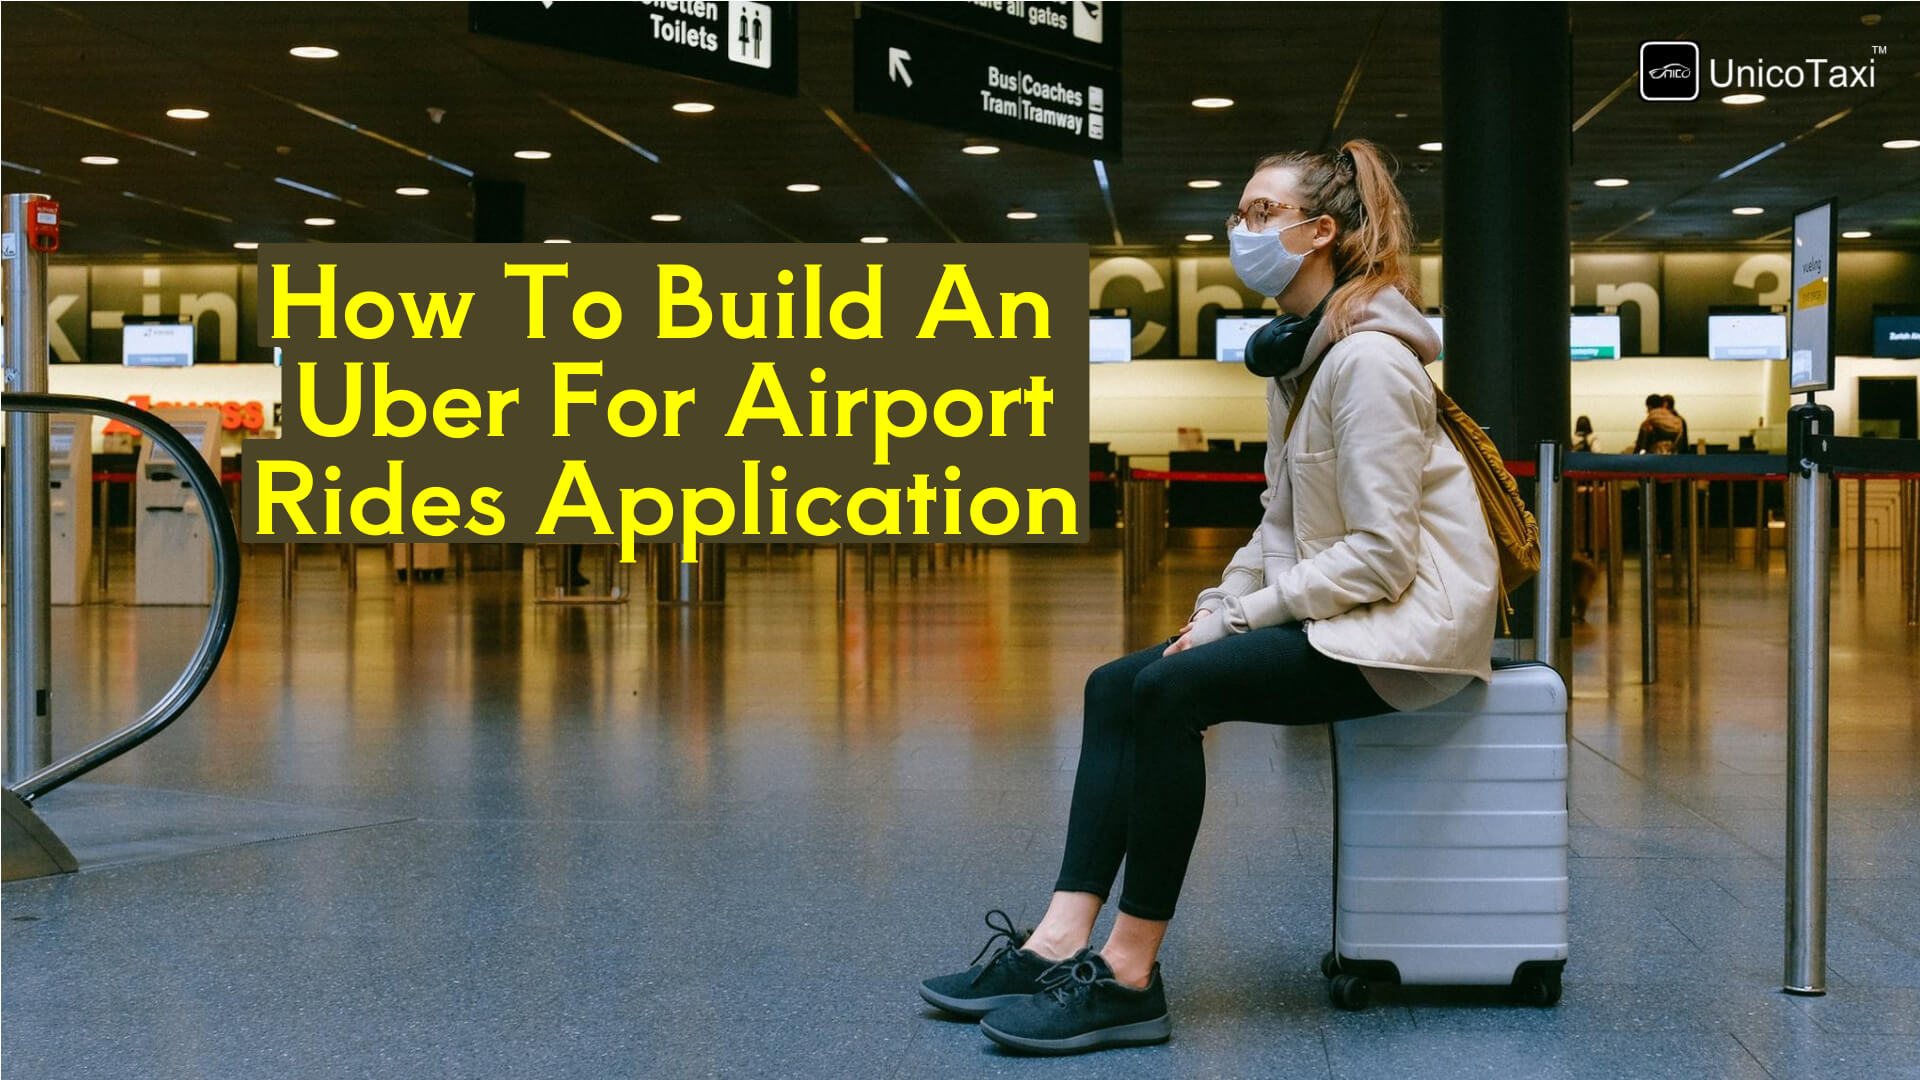 How to Build an Uber for Airport Rides Application for iOS and Android Devices?